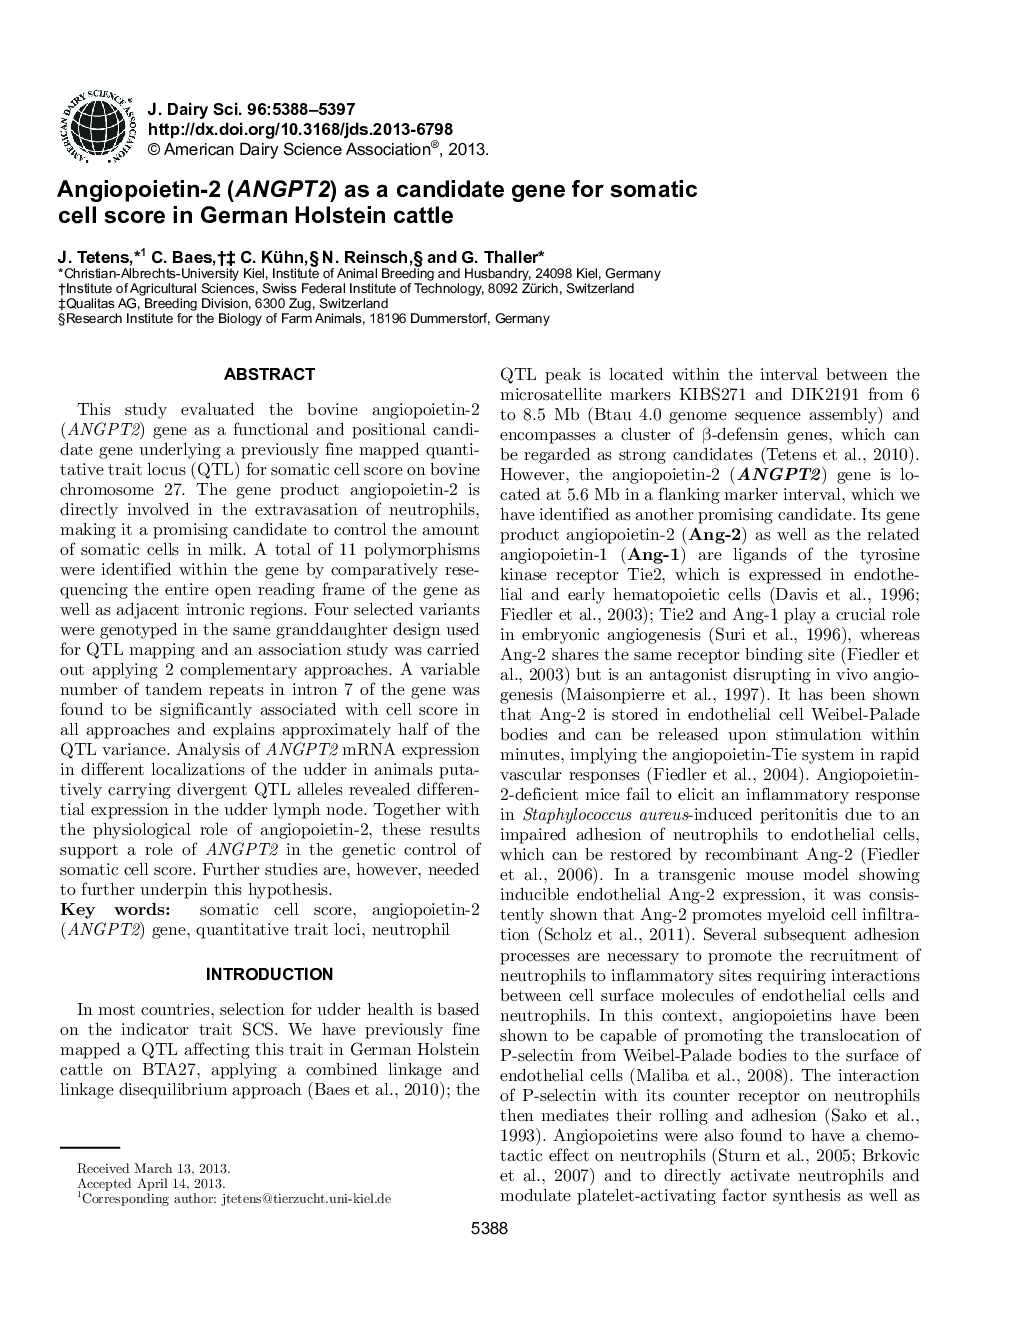 Angiopoietin-2 (ANGPT2) as a candidate gene for somatic cell score in German Holstein cattle